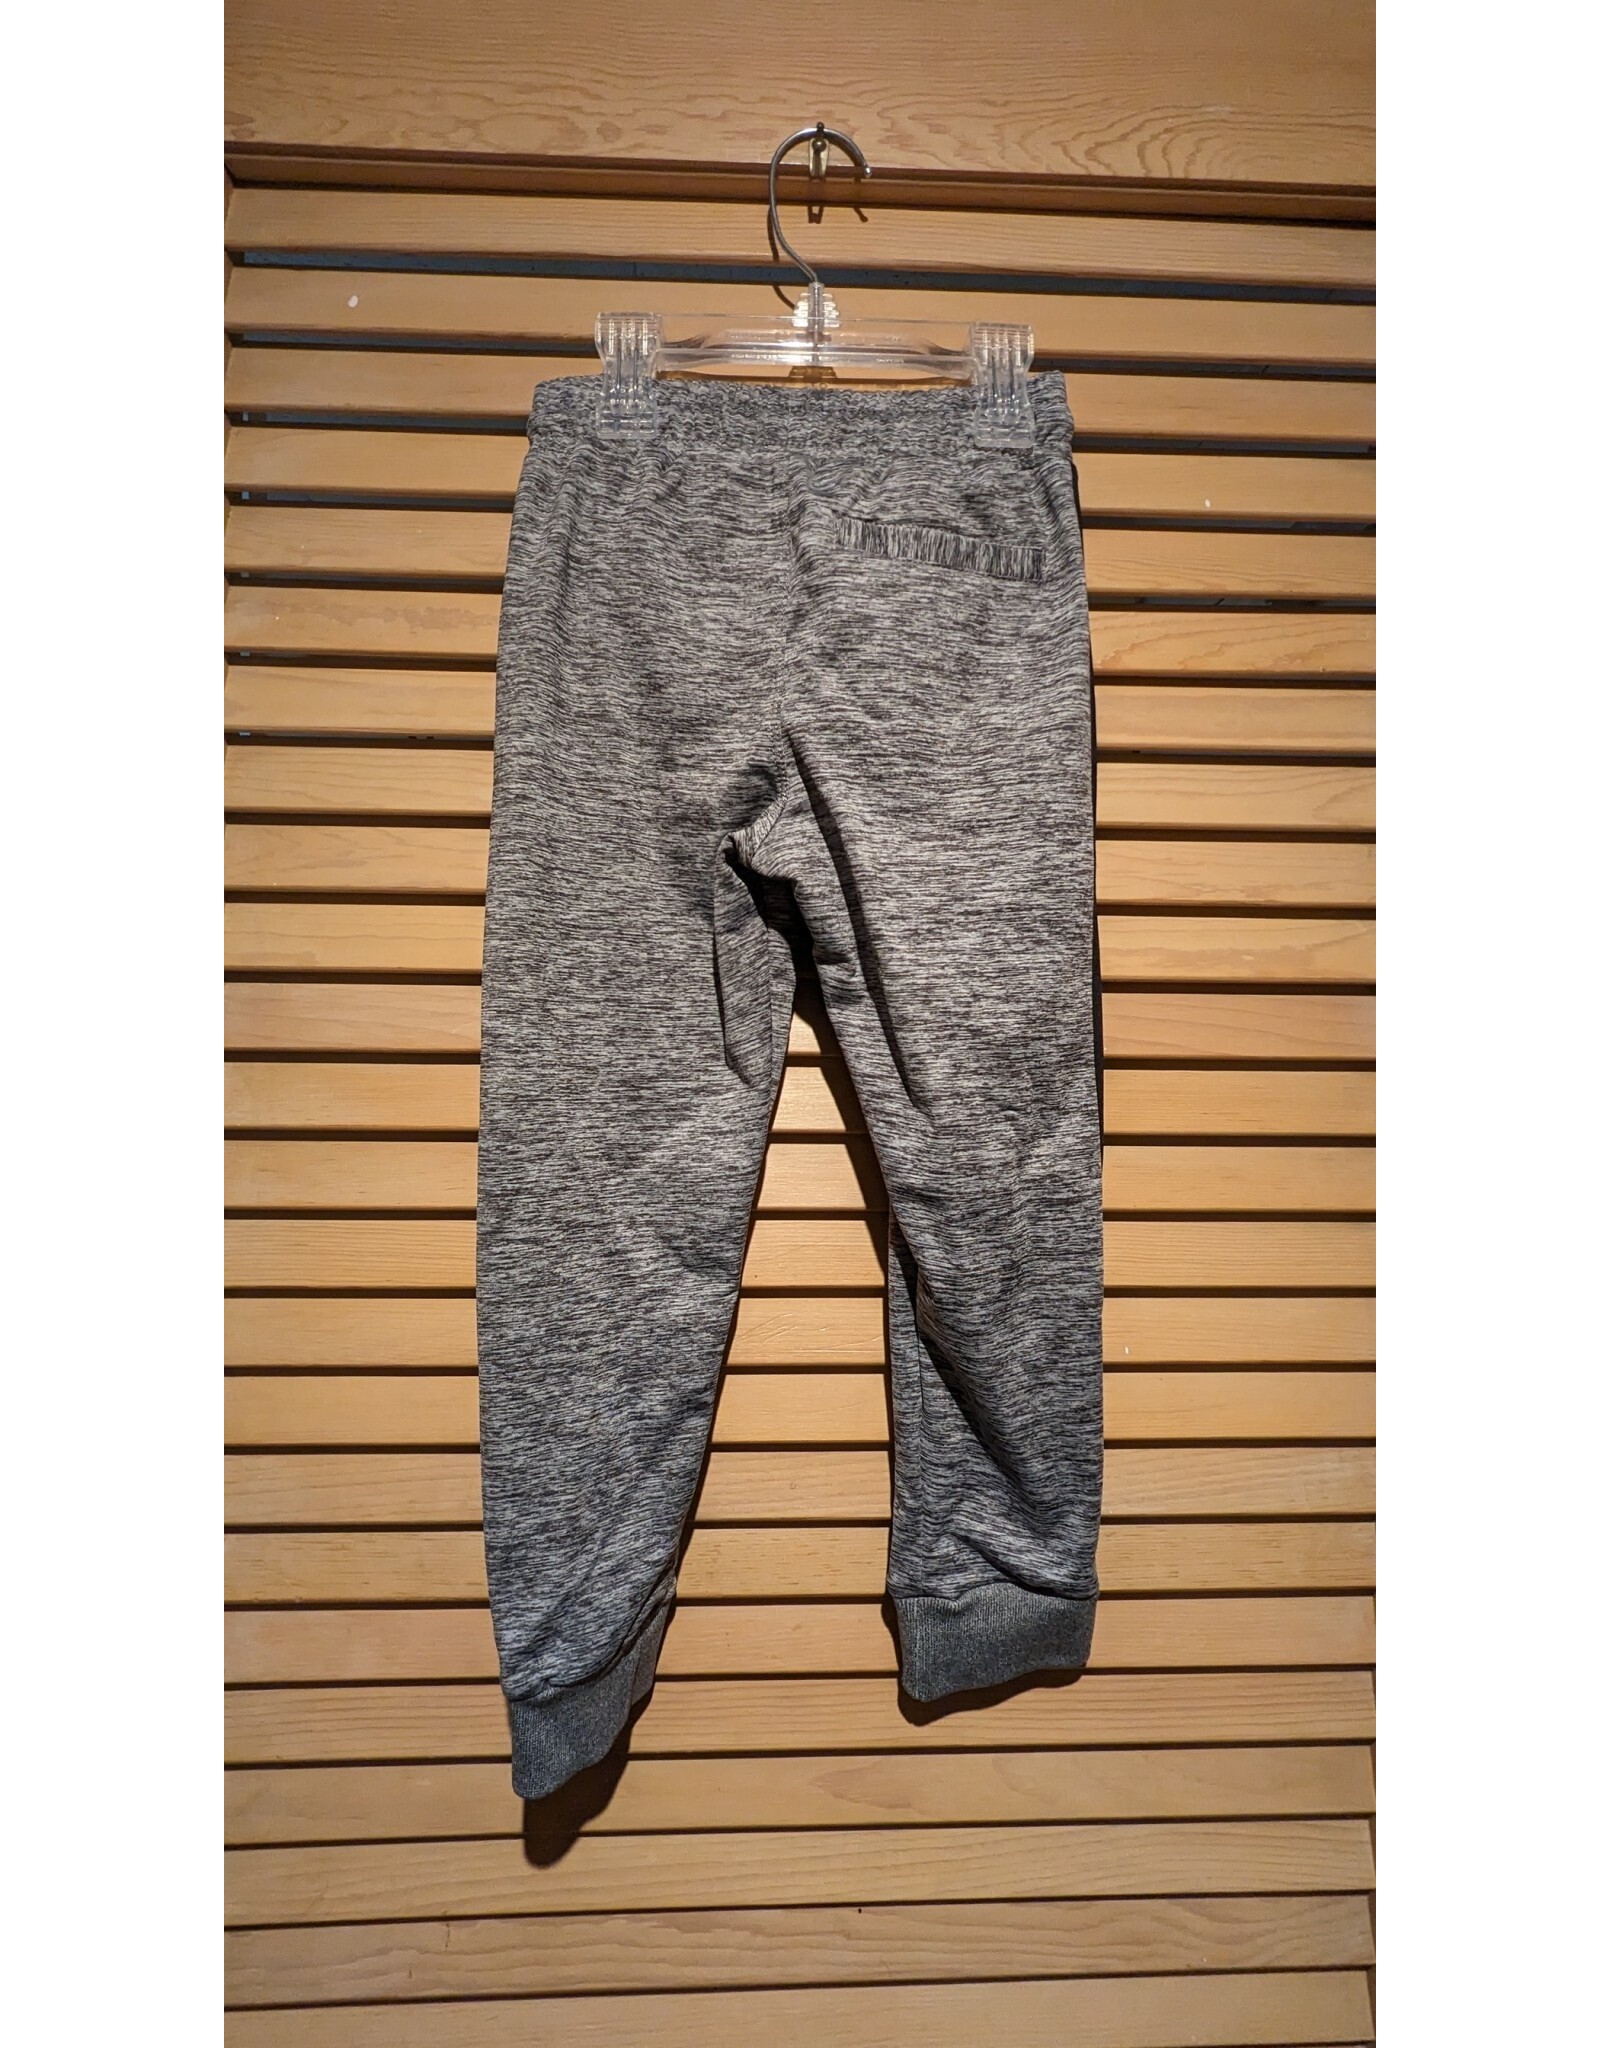 Noruk Spring into Action Athletic Pants